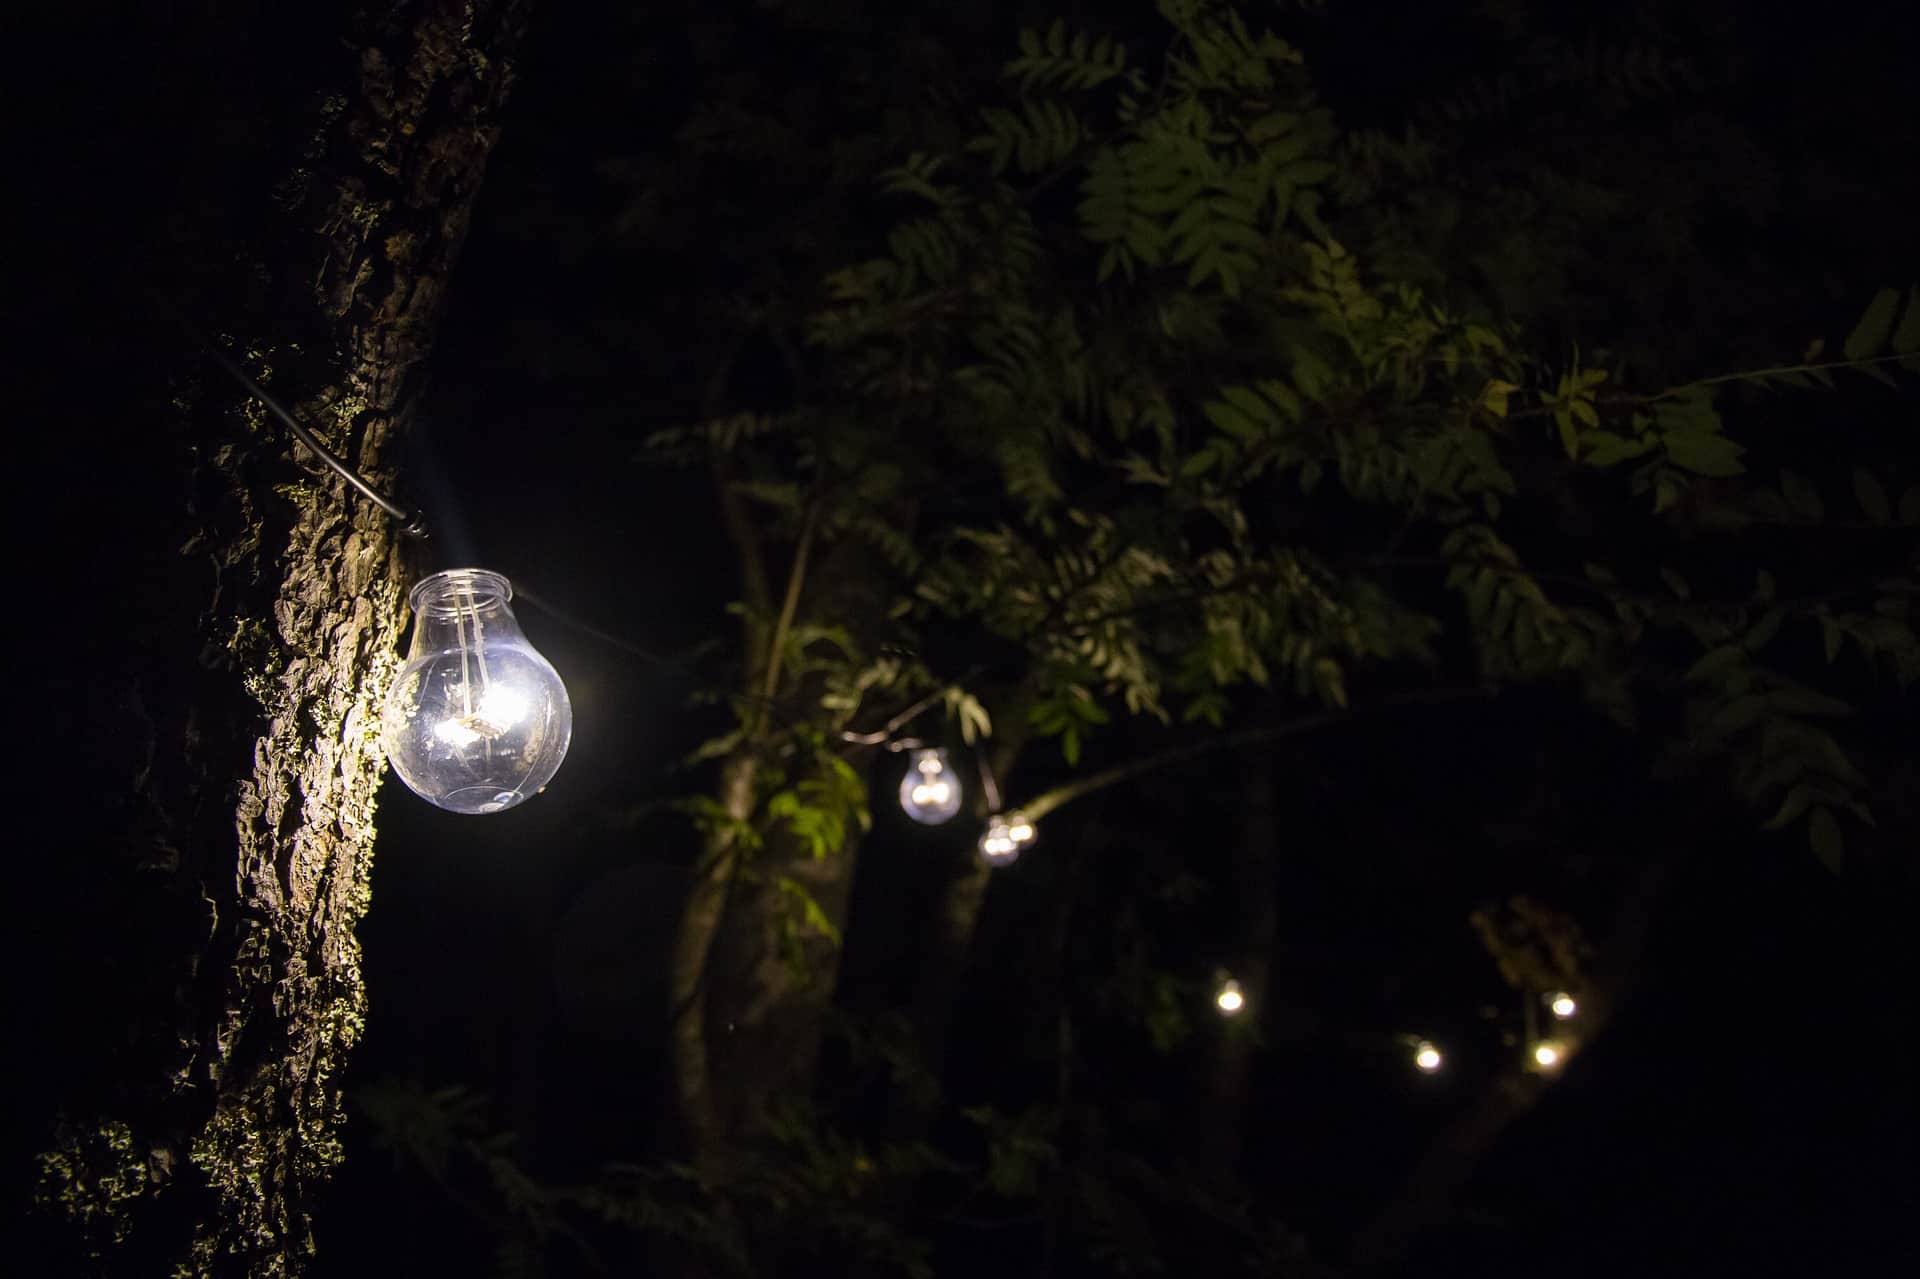 What lamps to choose for lighting trees in the garden?